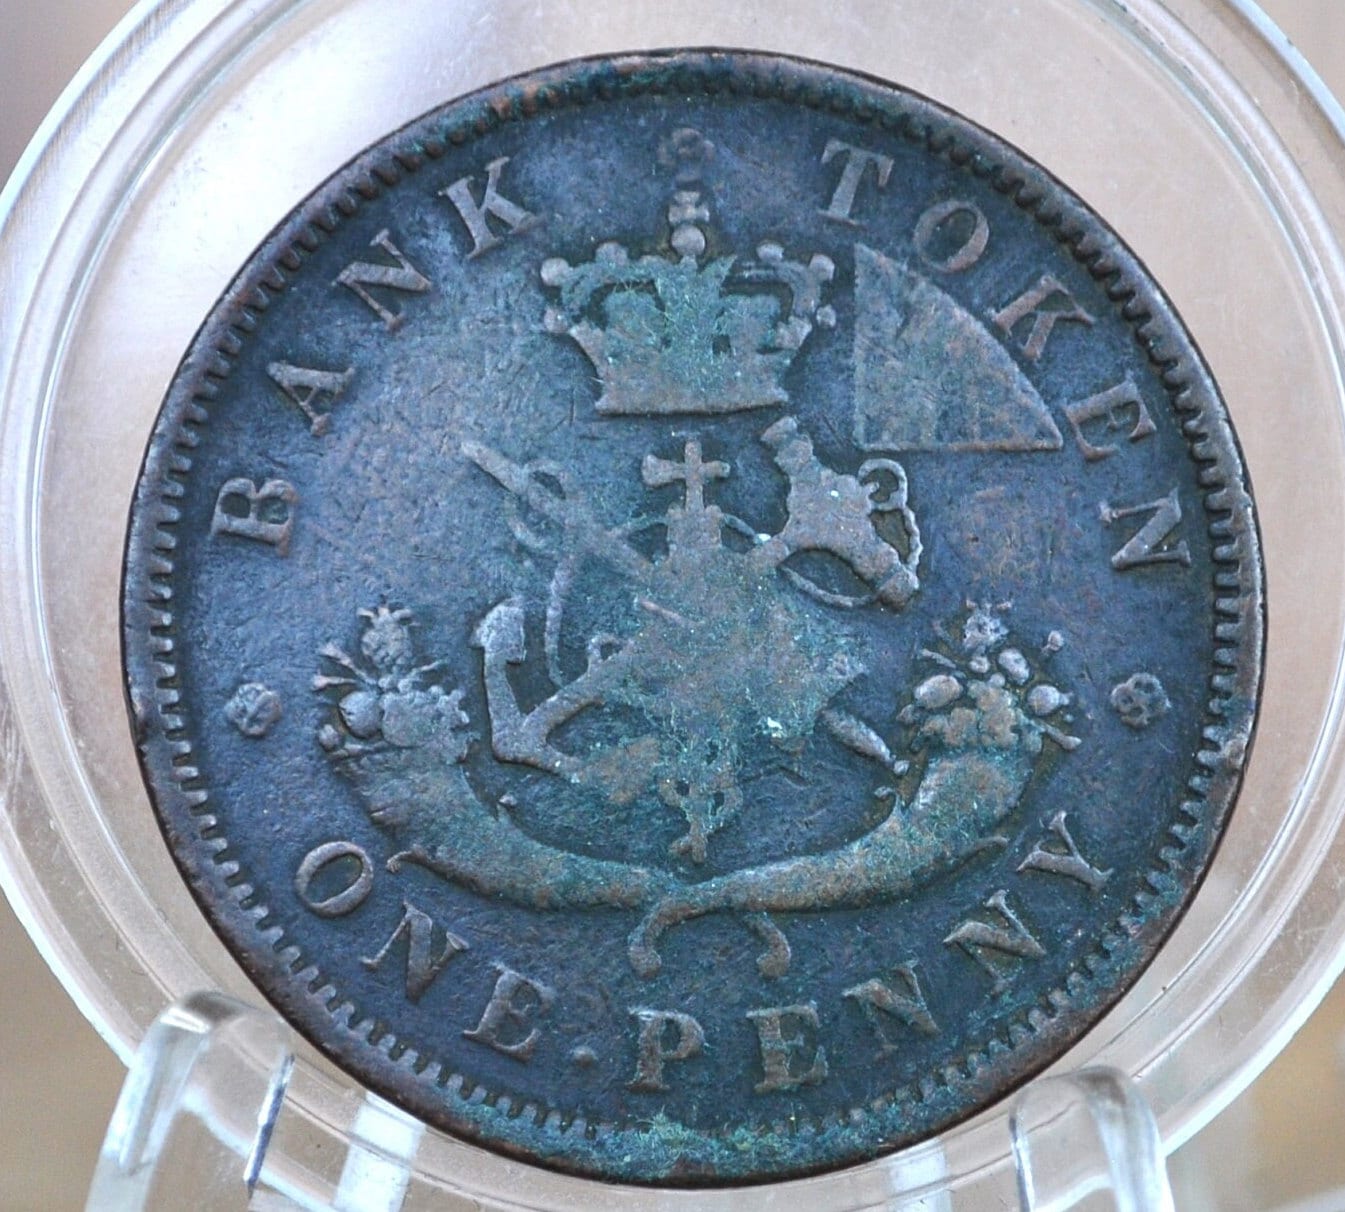 1857 Bank of Upper Canada One Penny - 1 Penny Bank Token - Great Detail - 1857 Bank Token One Penny - 1857 Canadian Large Cent